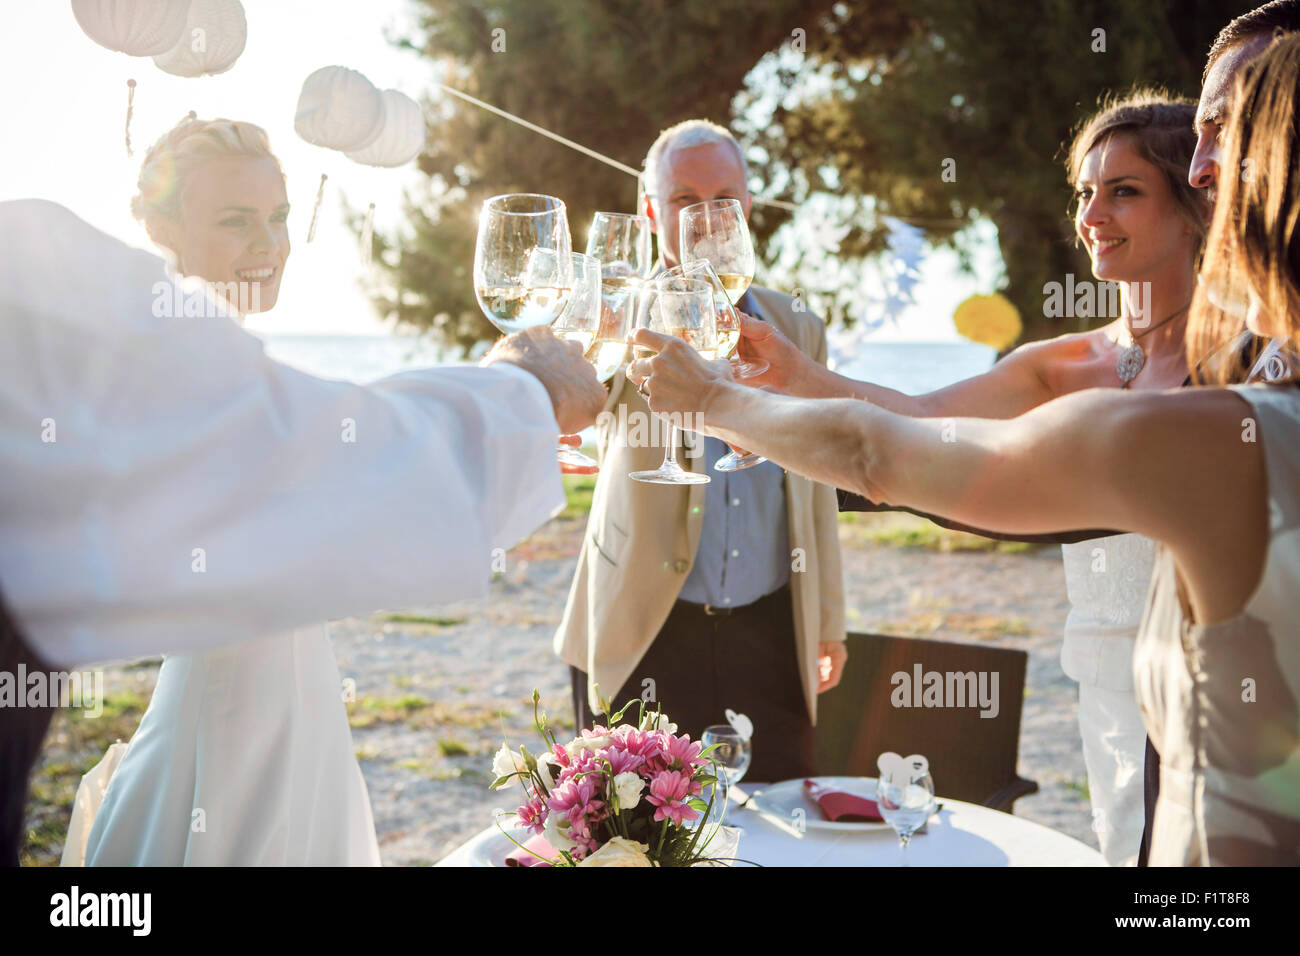 Drinking champagne at wedding reception on the beach Stock Photo